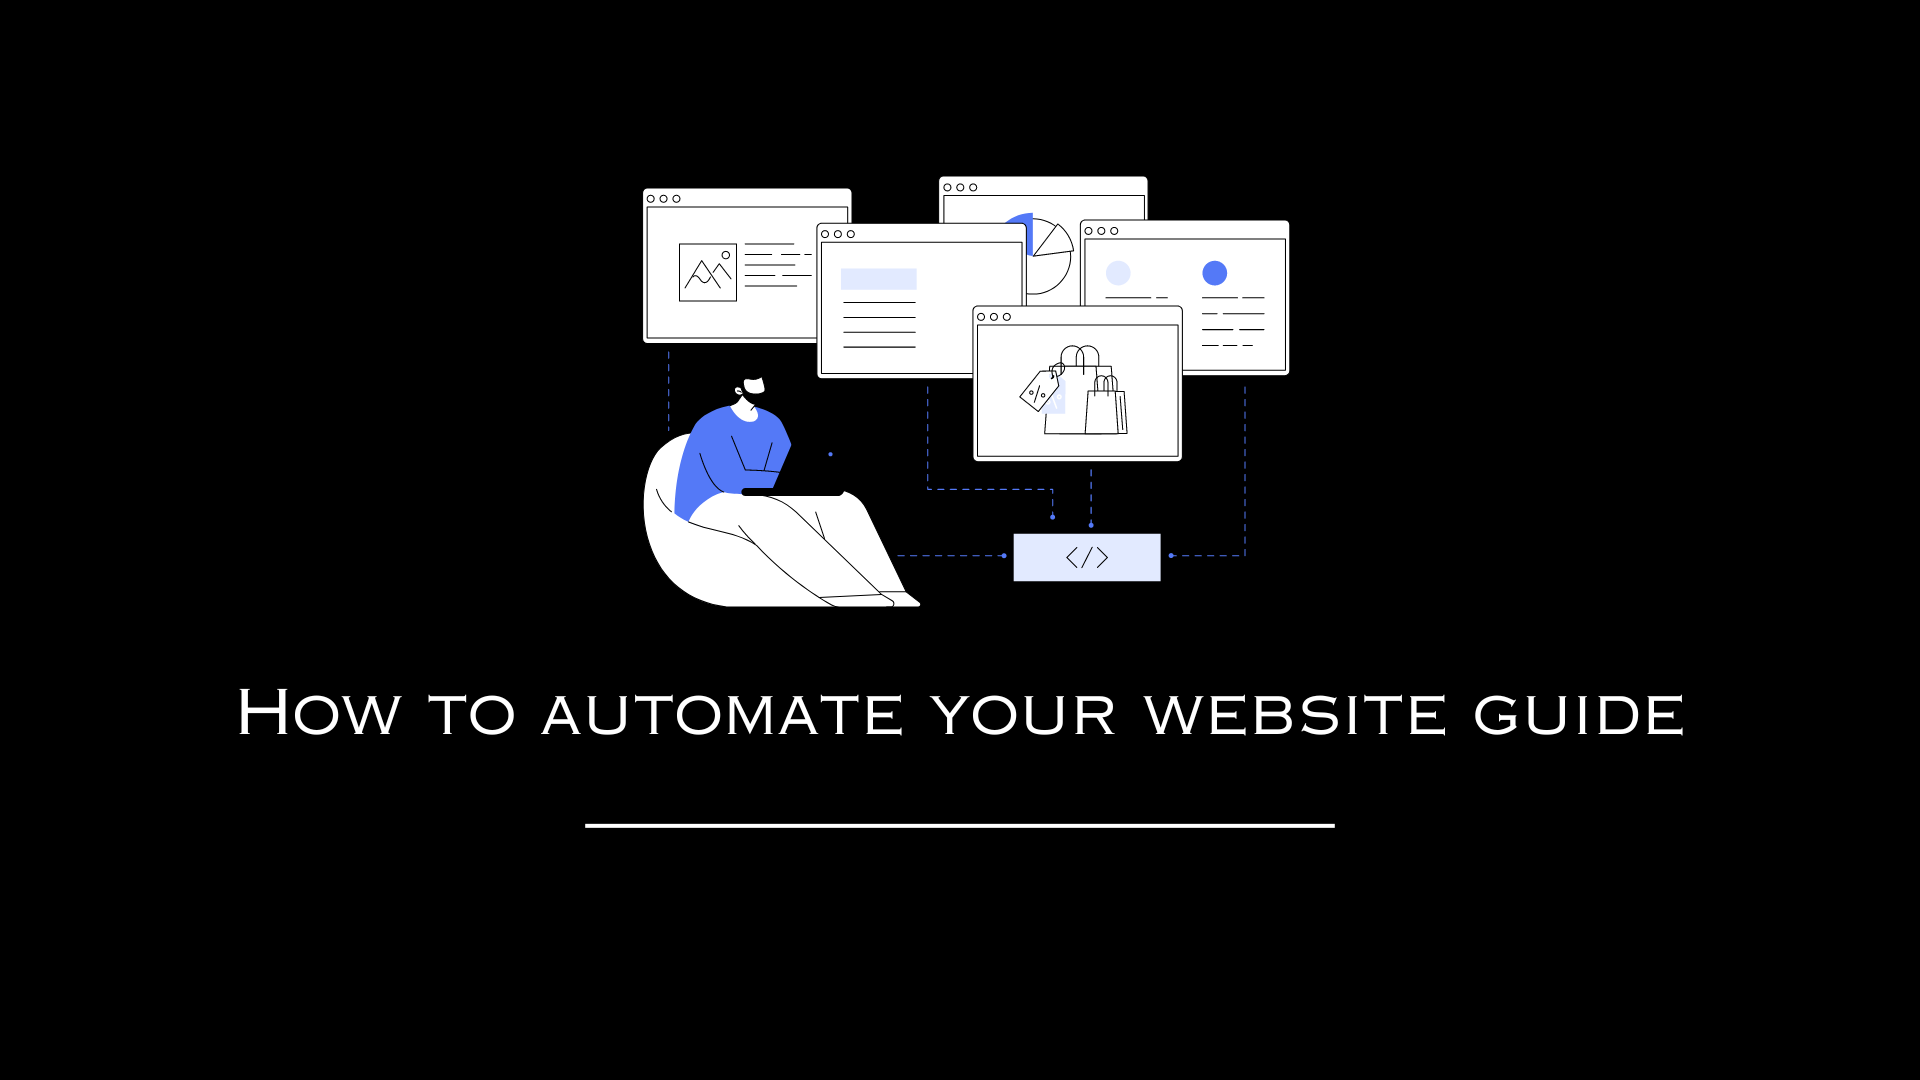 How to automate your website guide